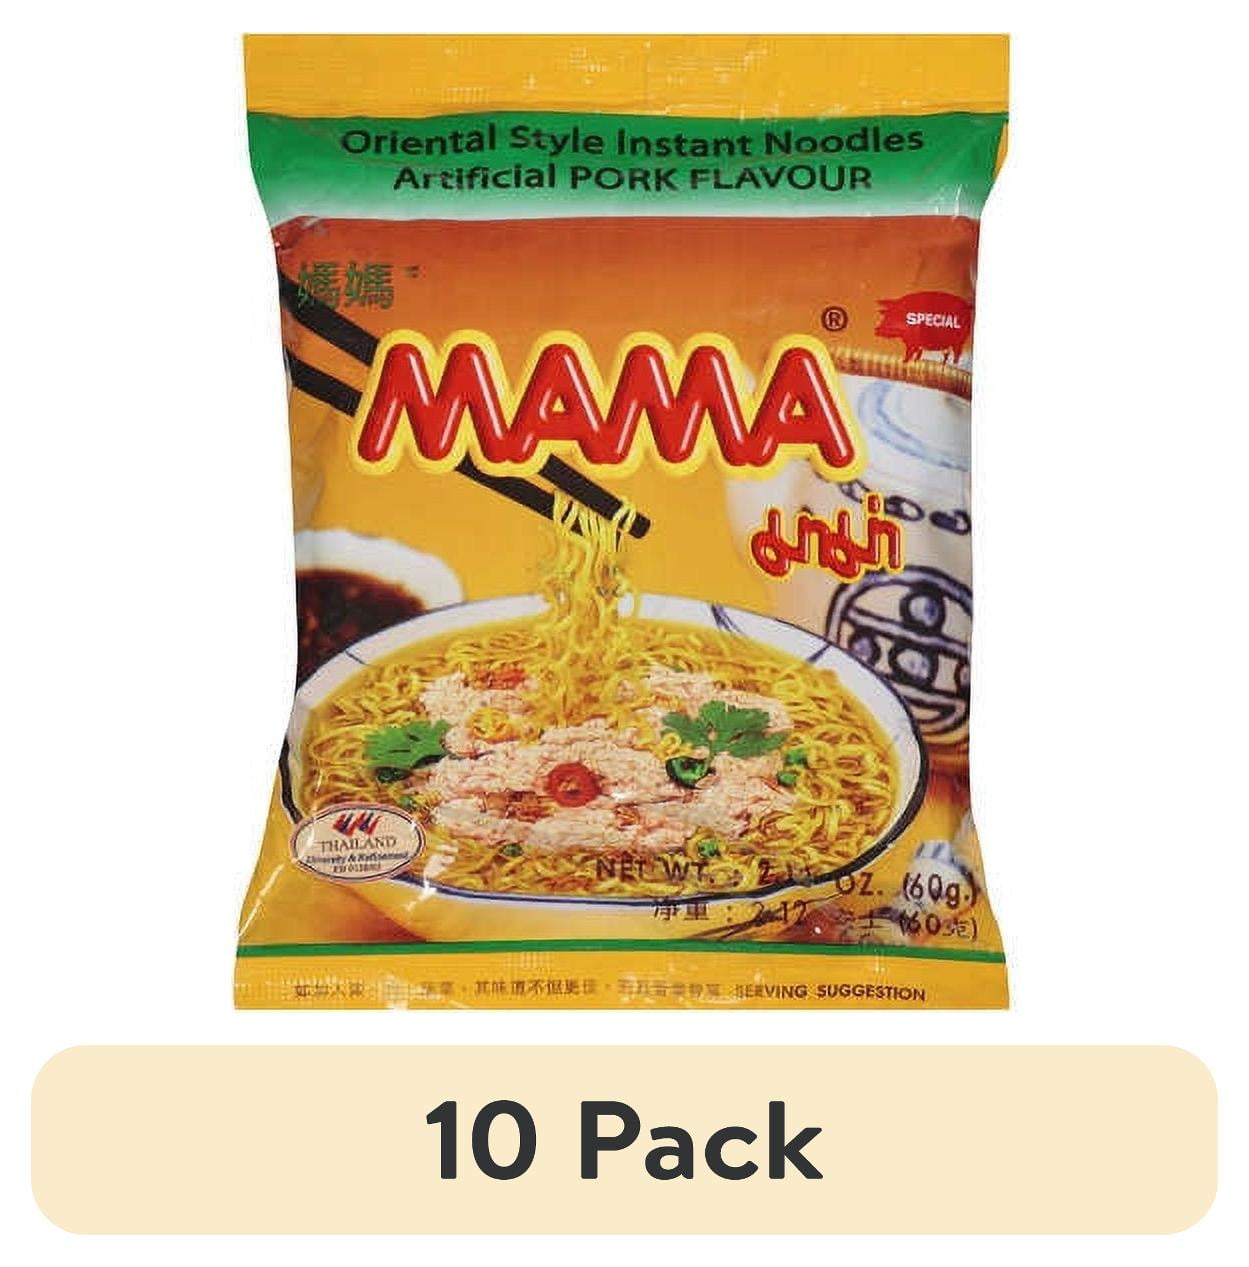  MAMA Oriental Style Instant Noodles (Artificial Chicken  Flavor), 1.94 Ounce each (Pack of 10) : Grocery & Gourmet Food